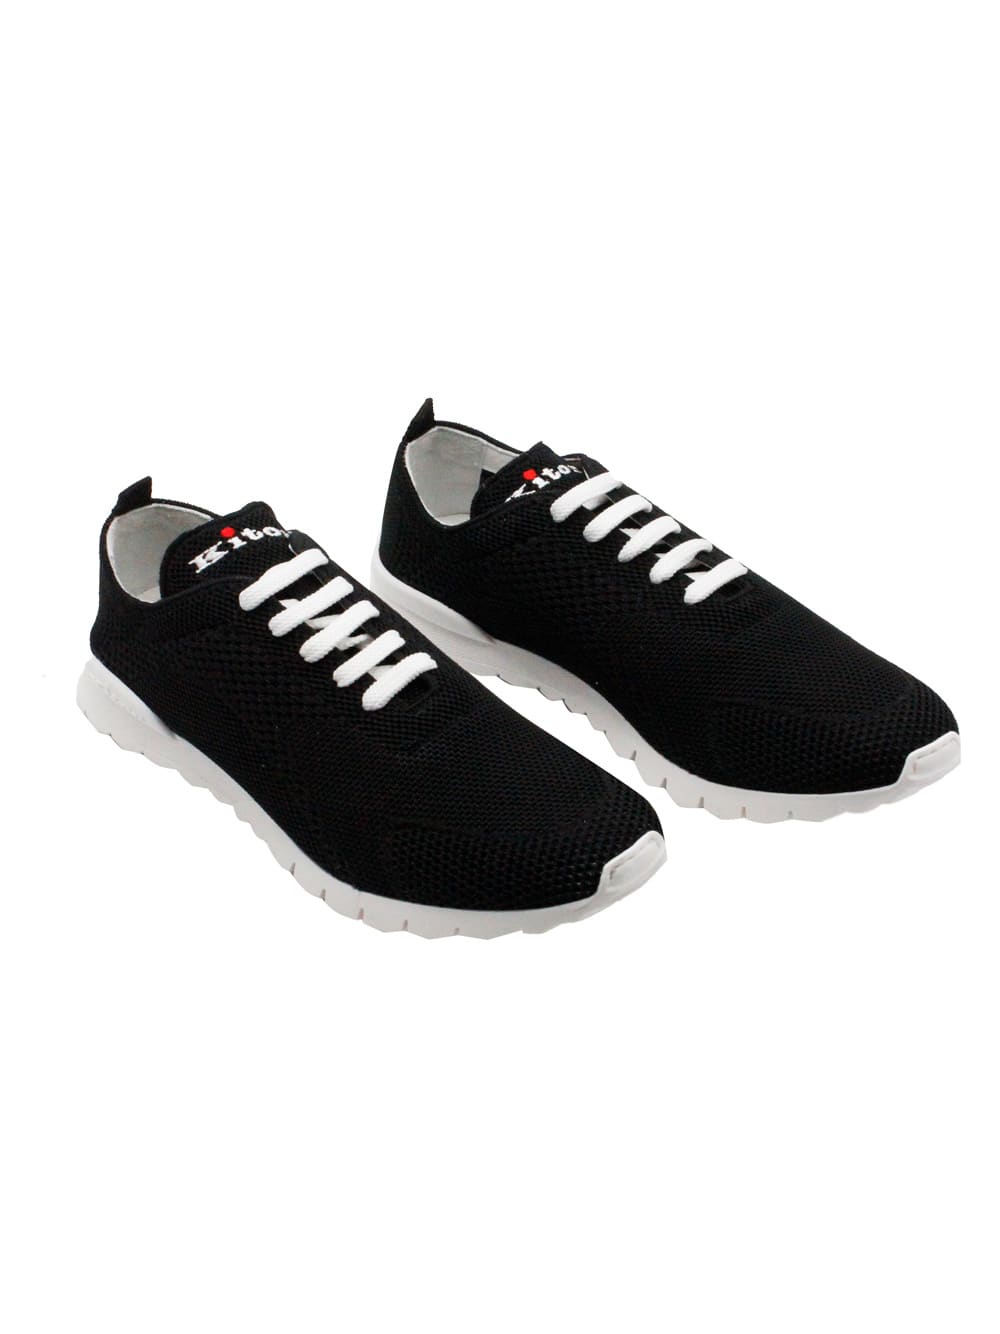 Shop Kiton Sneakers Made Of Knitted Fabric. The Bottom, With A White Sole, Is Flexible And Extralight; The Elas In Black